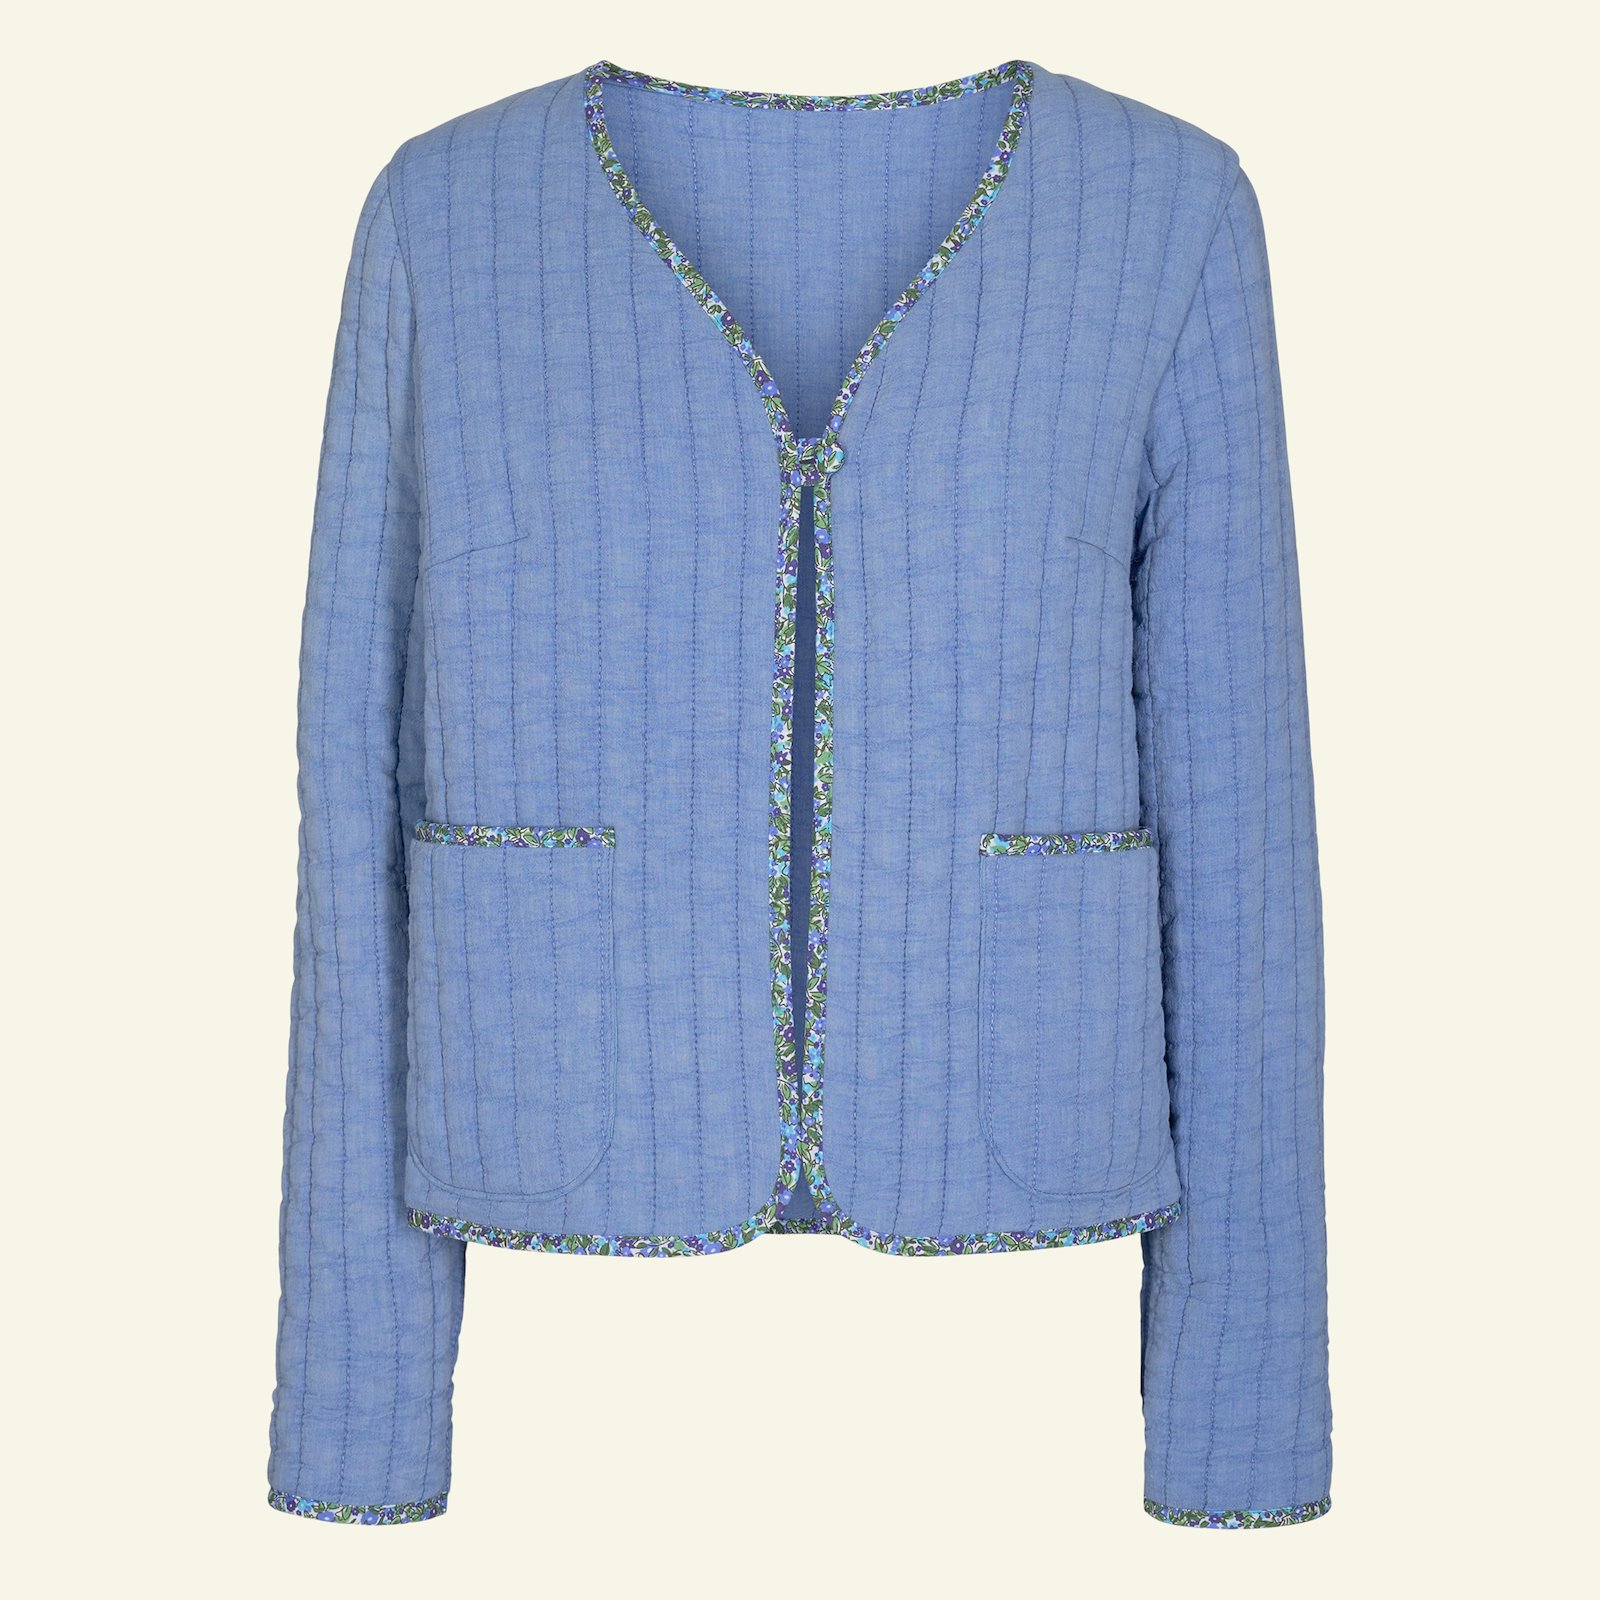 Quilted jacket and waistcoat, 46/18 p24047_920229_64110_43507_sskit